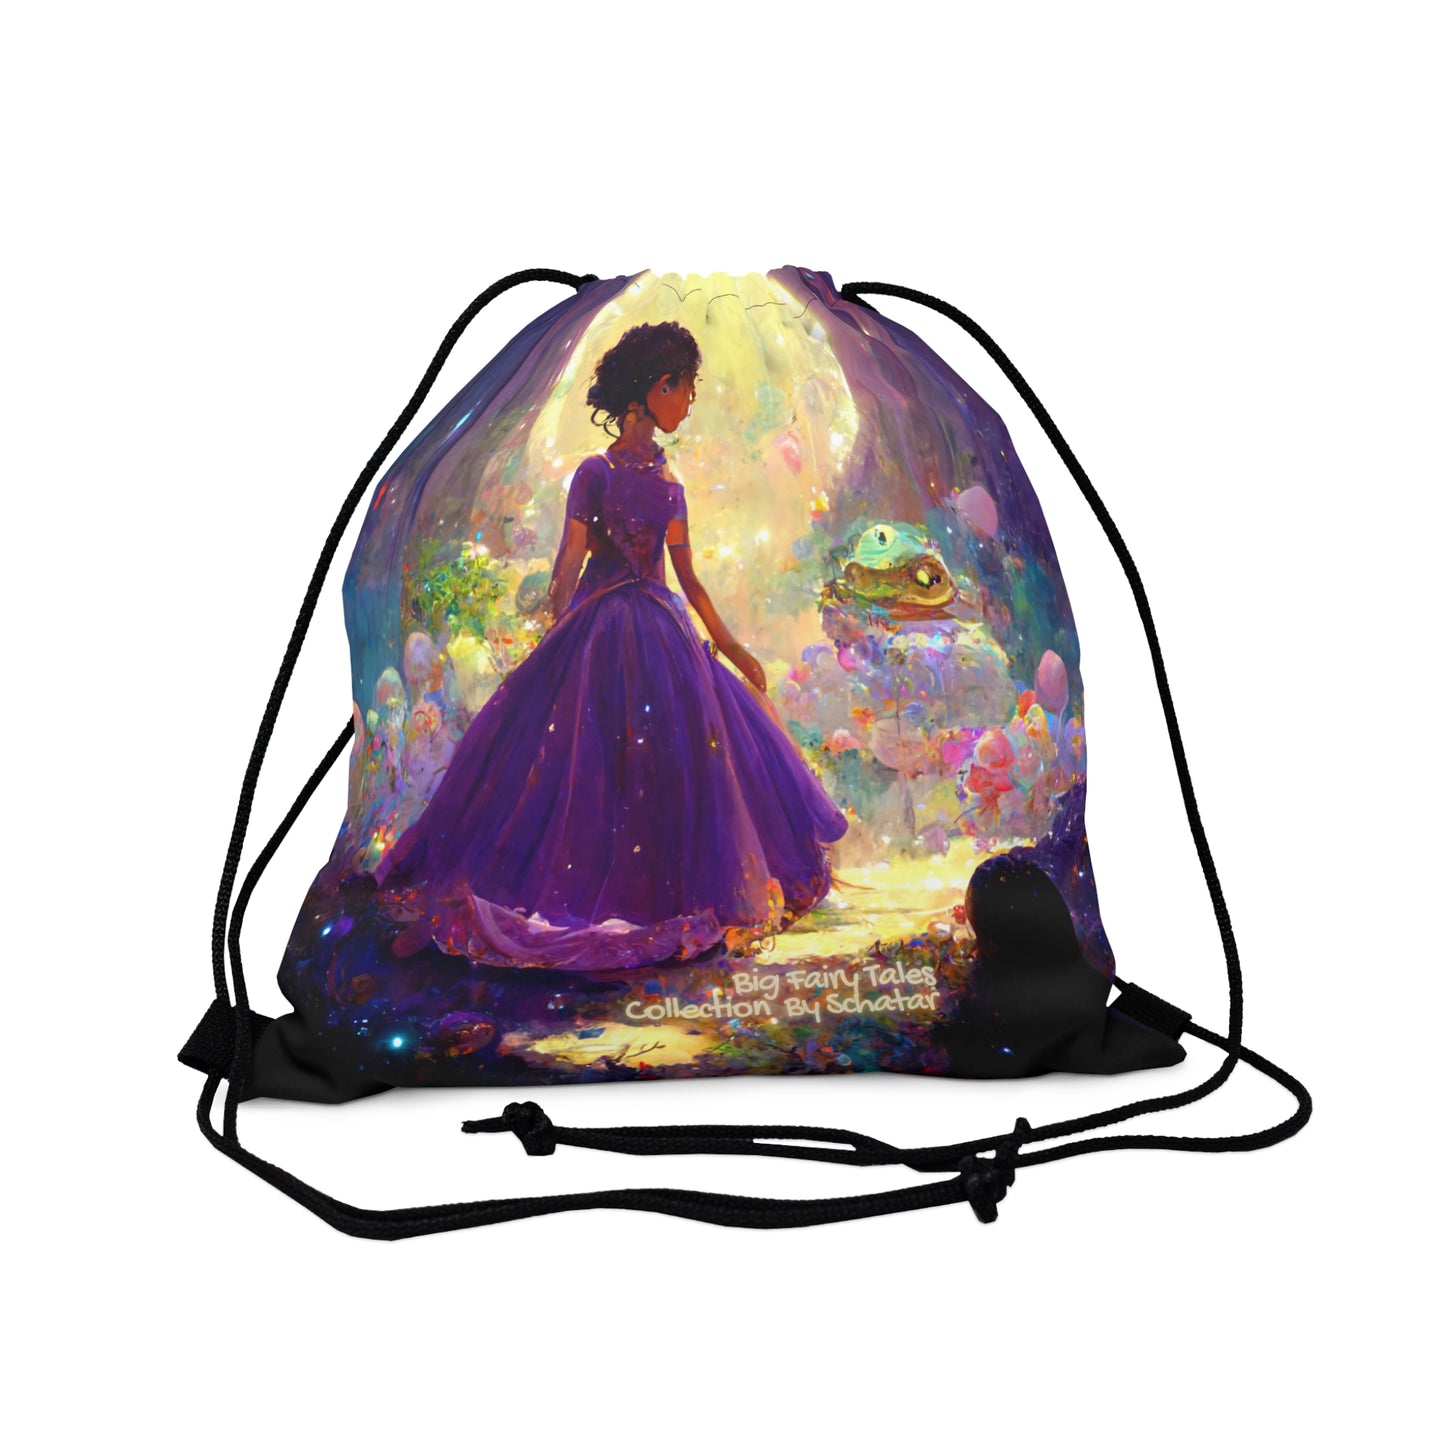 Big Fairy Tales By Schatar Princess And Frog Prince Cinch Sack